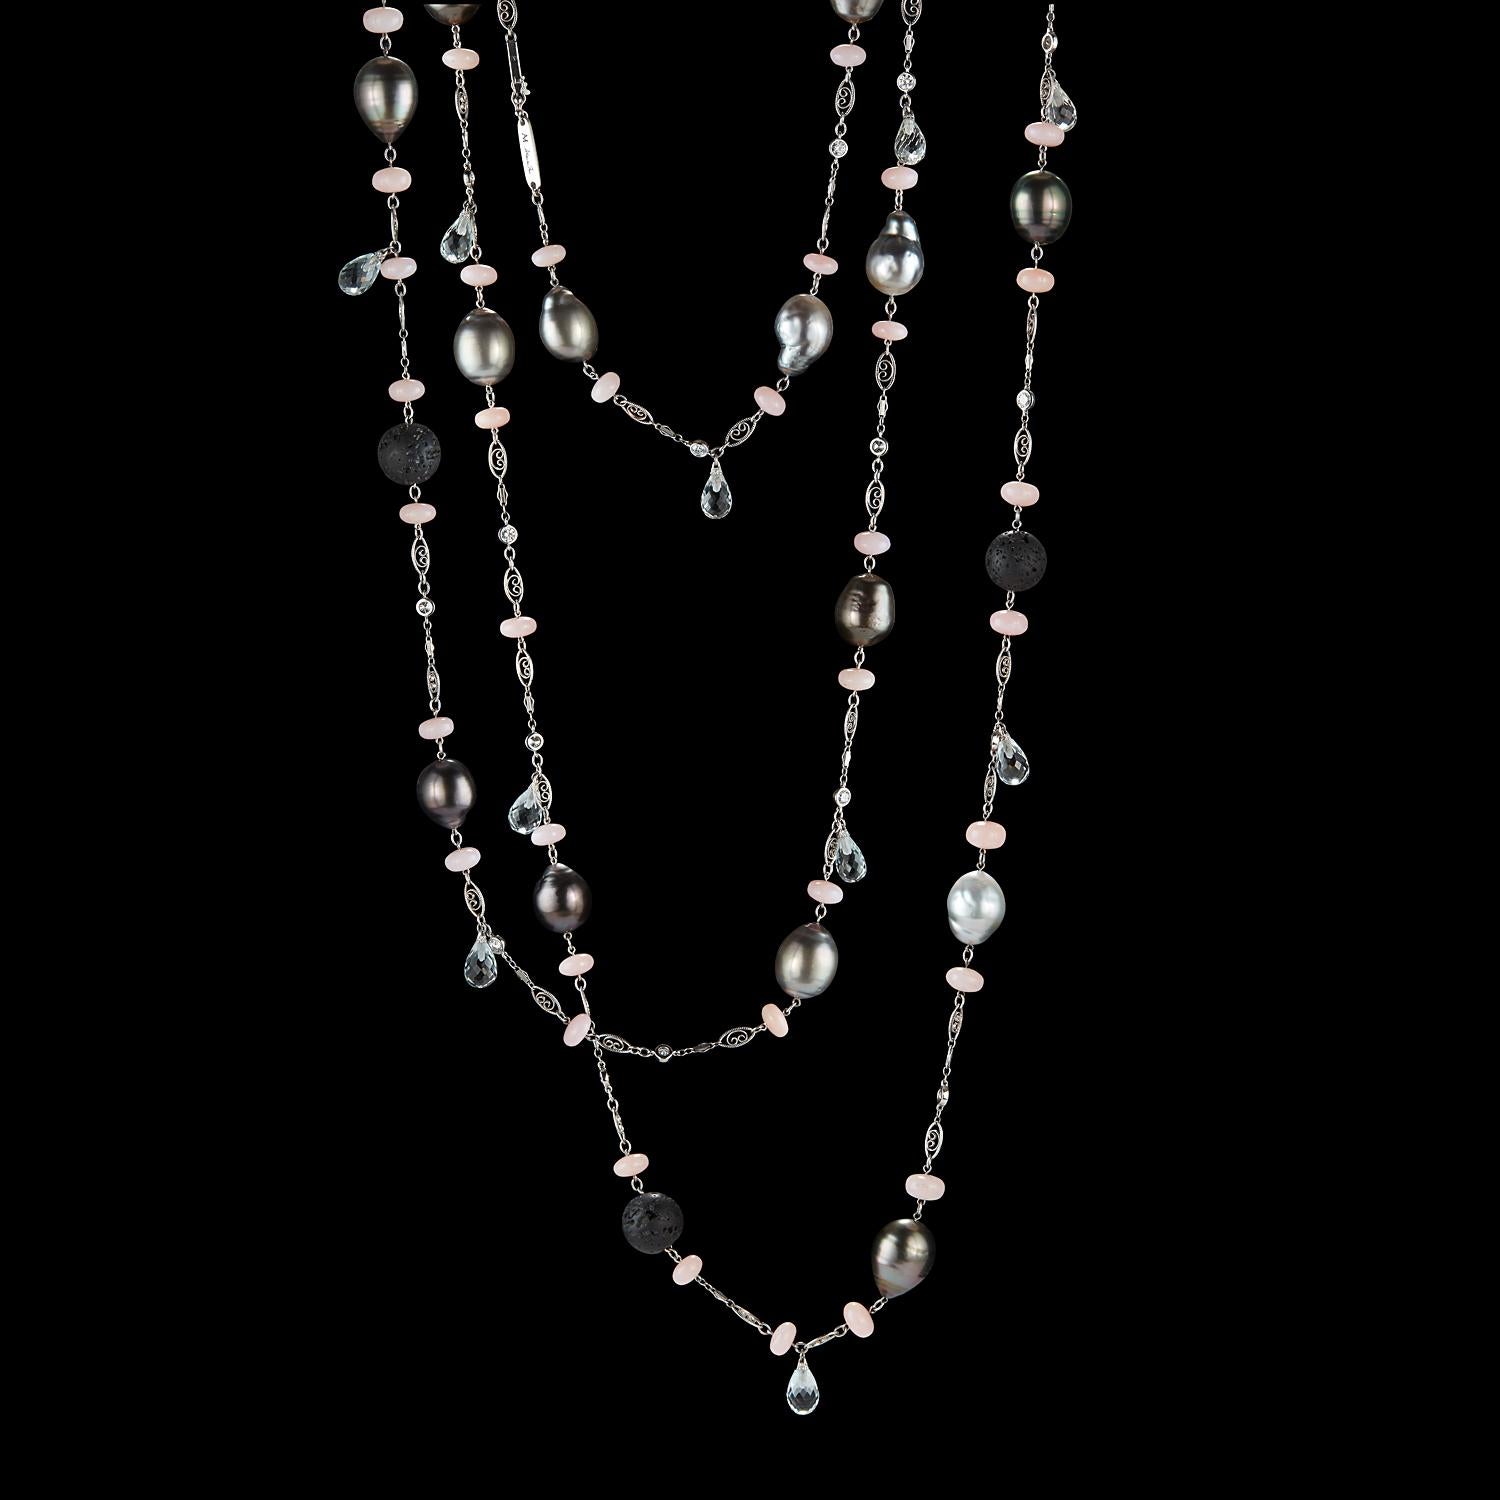 Alexandra Mor 36 inch Sautoir necklace featuring 12 Brilliant-Cut White Diamonds weighing 1.28 carats, 7 White Topaz Briolettes weighing 21.71 carats, 9 Grey Baroque Pearls weighing 133.94 carats, 28 Pink Cabochon Opals weighing 42.00 carats and 4